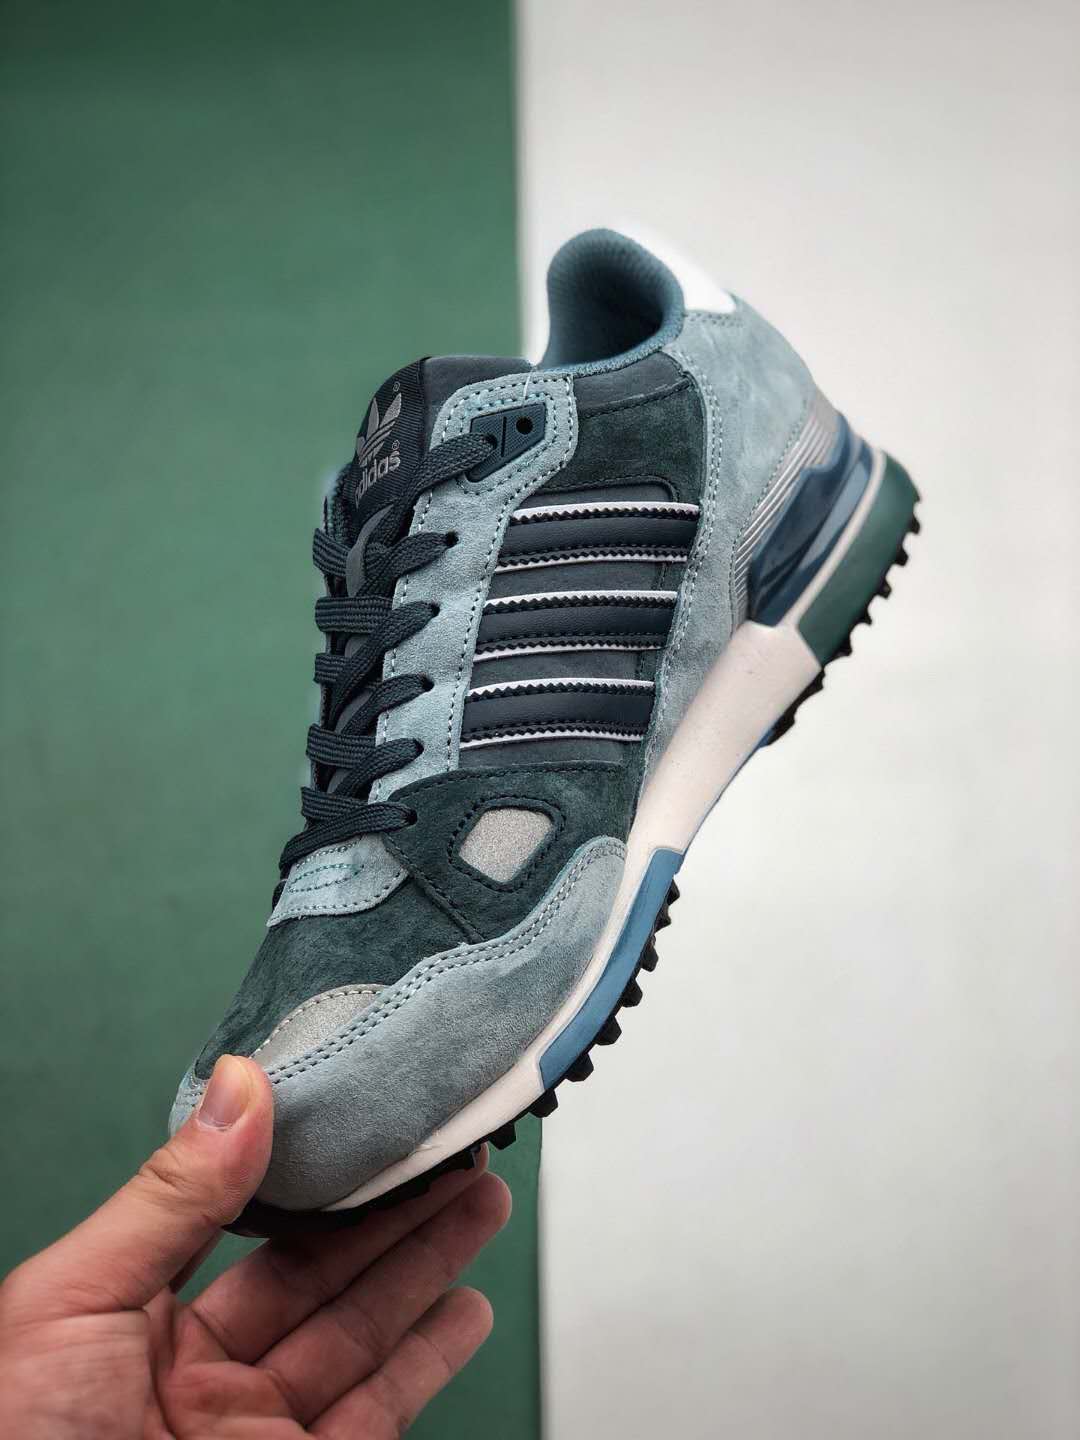 Adidas Originals ZX 750 Dark Petrol M18258 - Shop Now and Elevate Your Style!